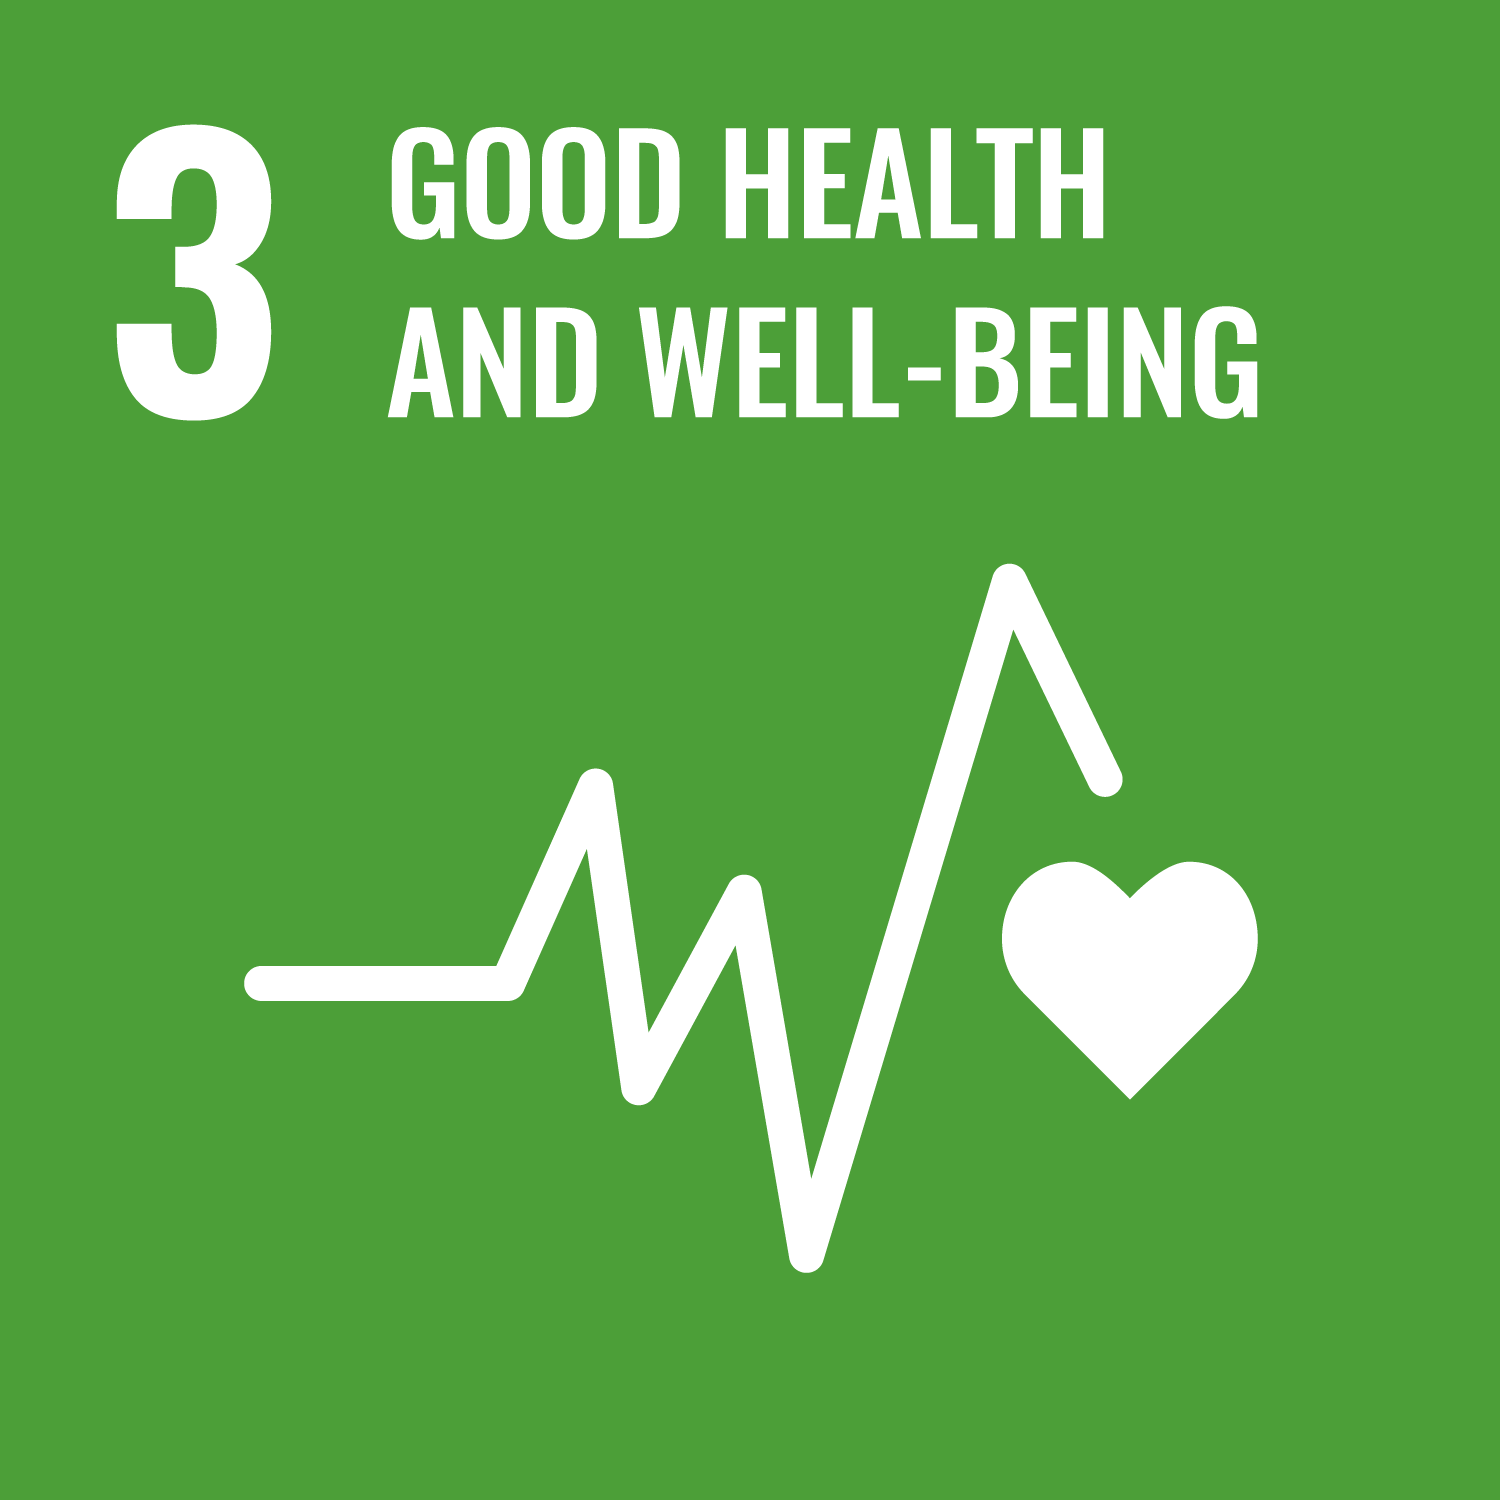 SDG 3 - Good Health and Wellbeing